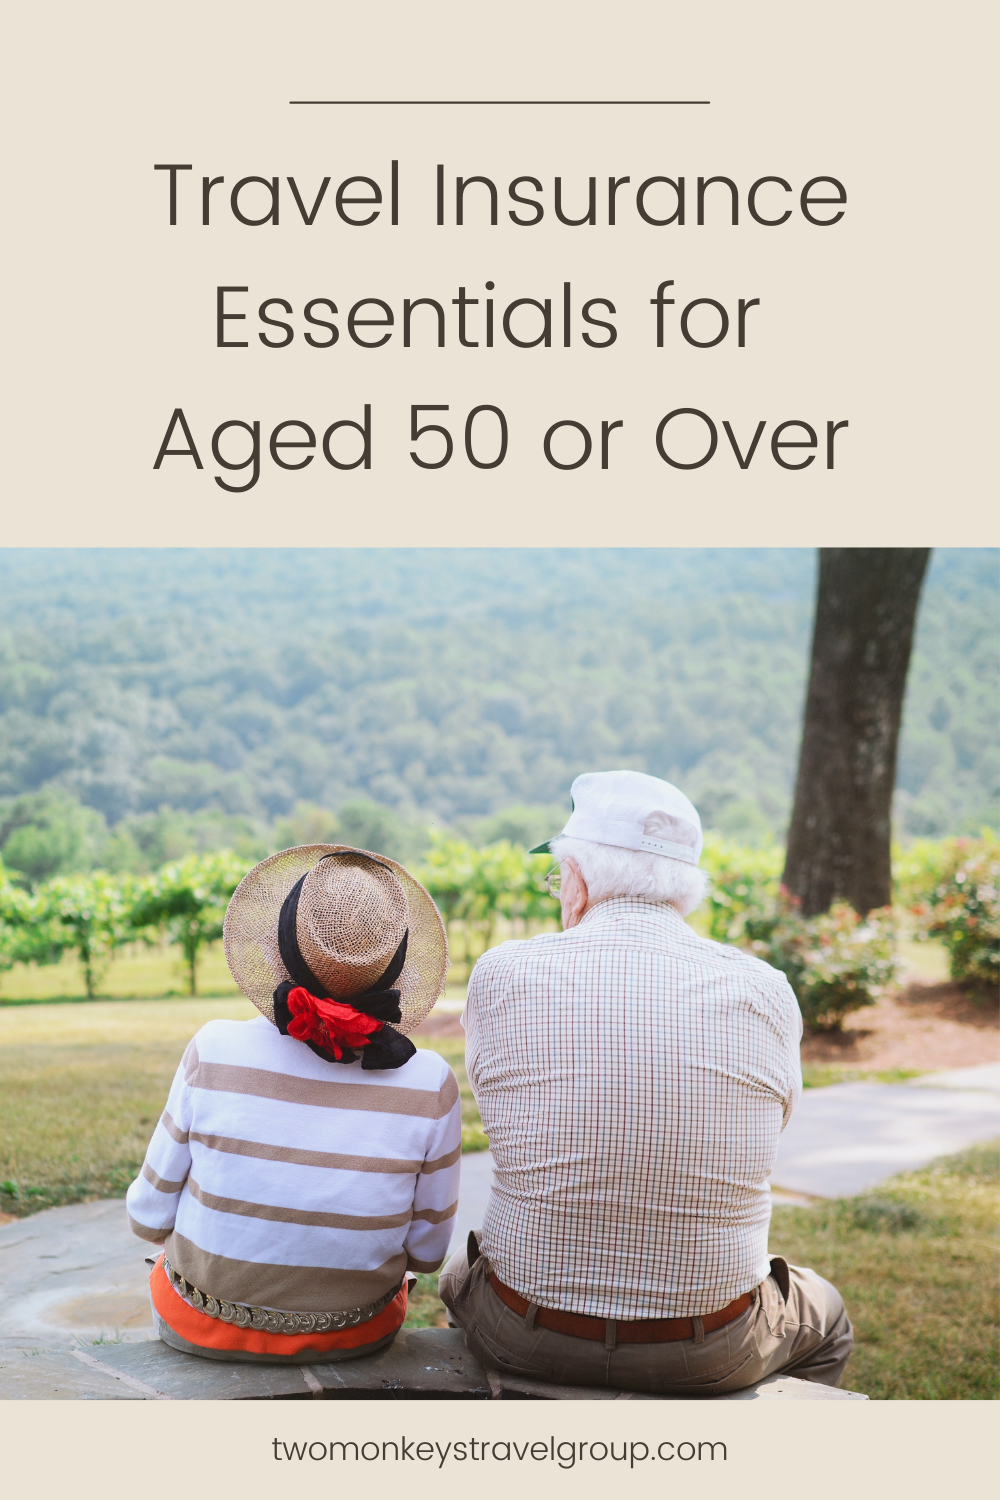 Aged 50 or Over Here’s a Quick Guide to Travel Insurance Essentials